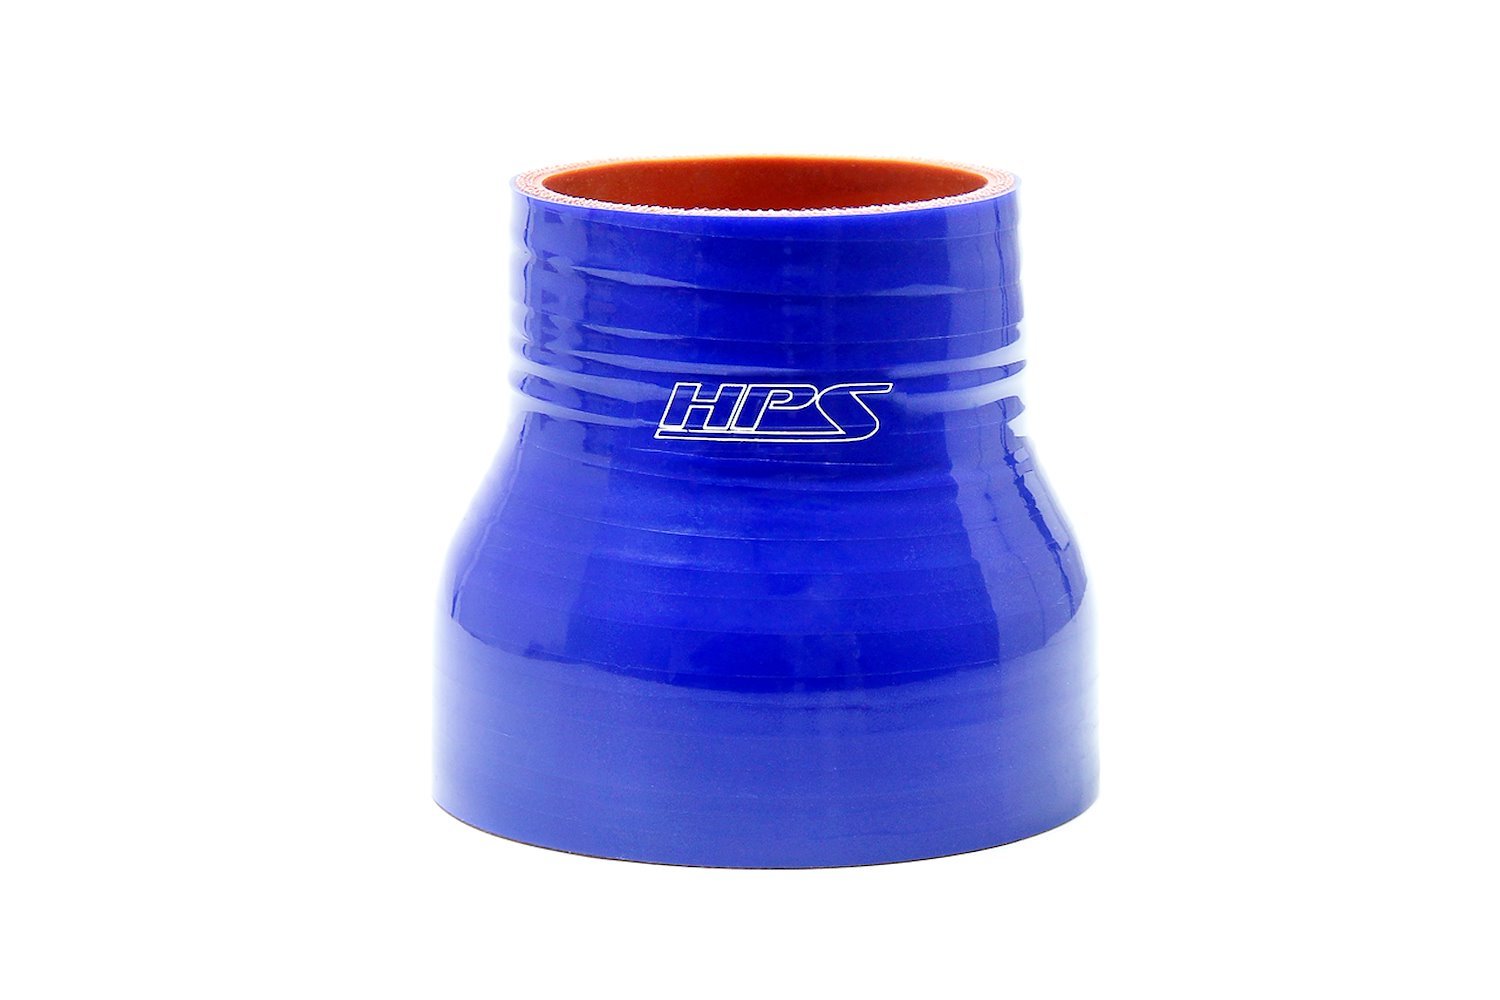 HTSR-225-375-BLUE Silicone Reducer Hose, High-Temp 4-Ply Reinforced, 2-1/4 in. - 3-3/4 in. ID, 3 in. Long, Blue